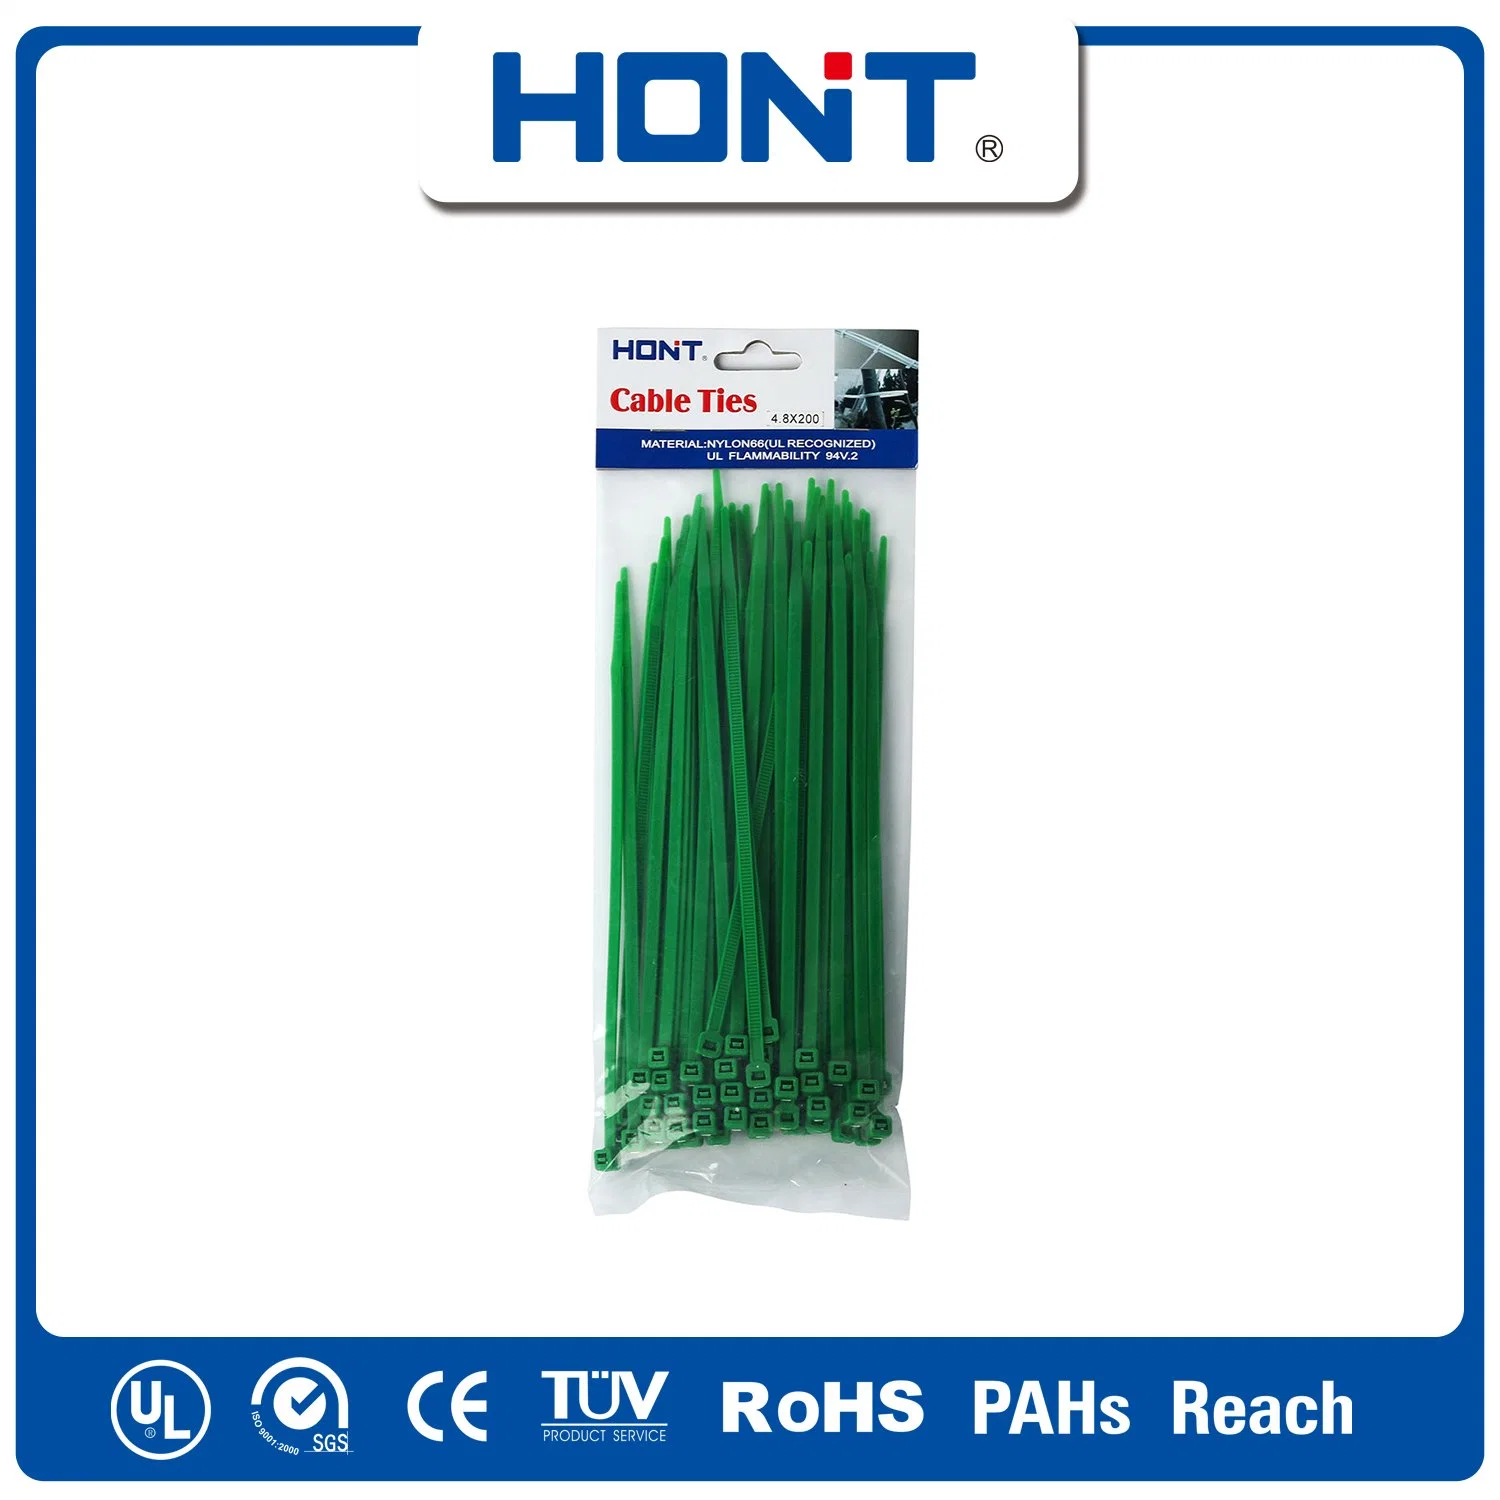 Nylon Hont Plastic Bag + Sticker Exporting Carton/Tray Steel Strap Cable Accessories with ISO